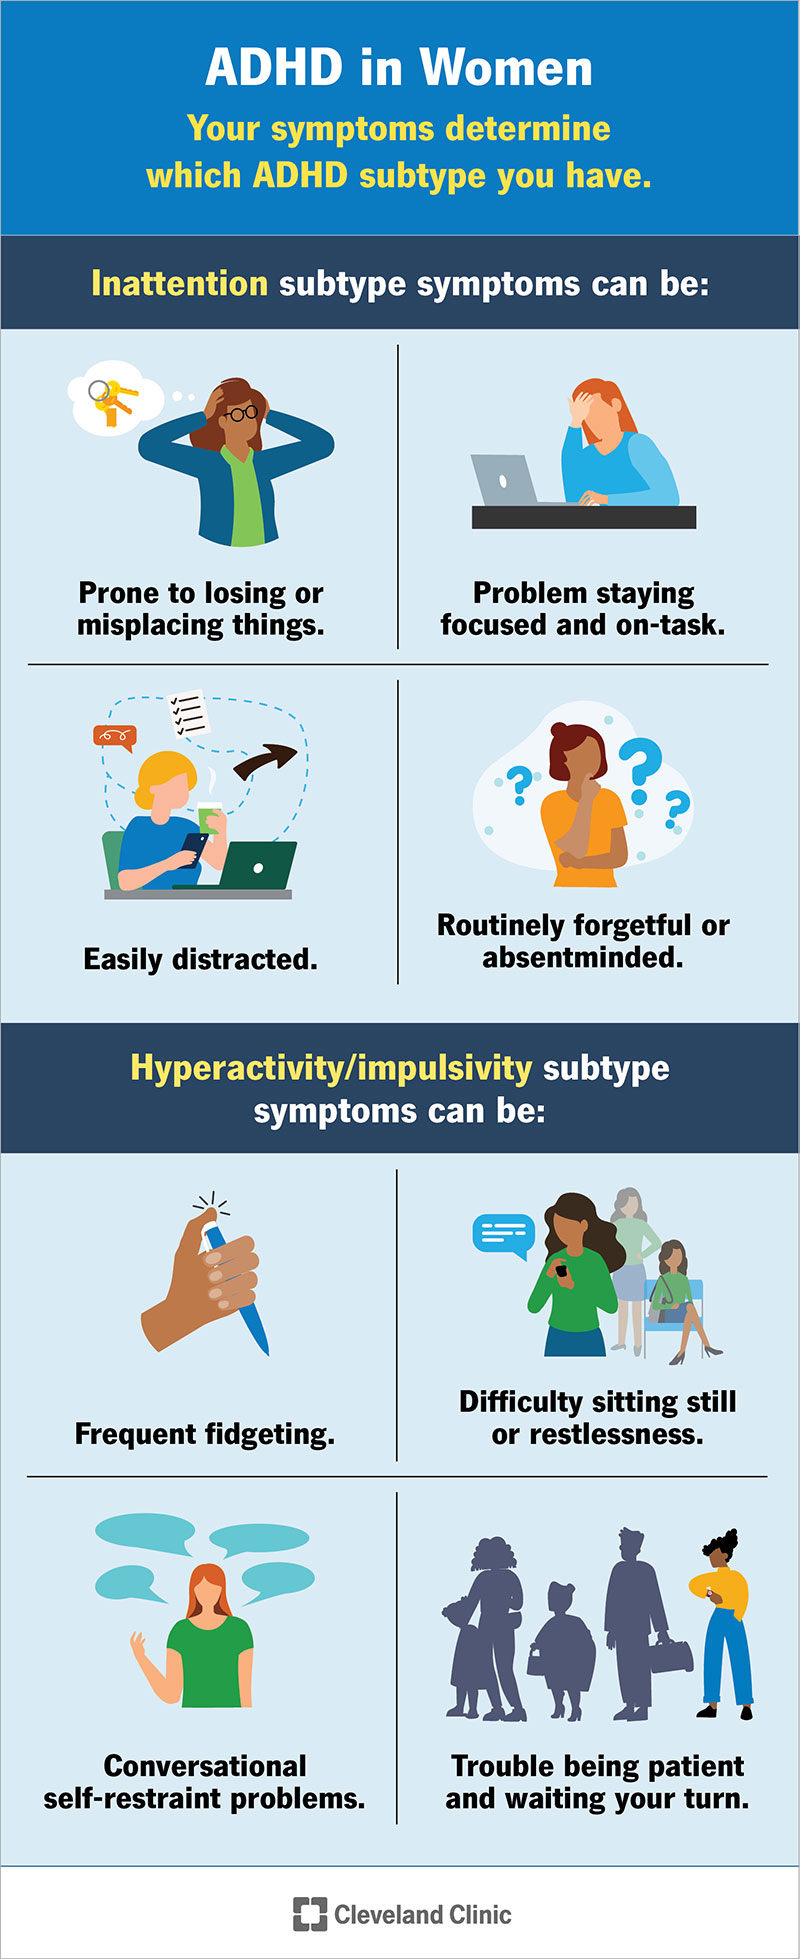 ADHD in women can cause symptoms that revolve around hyperactivity and impulsivity, inattention or both. Placement: Align with overview at the top.